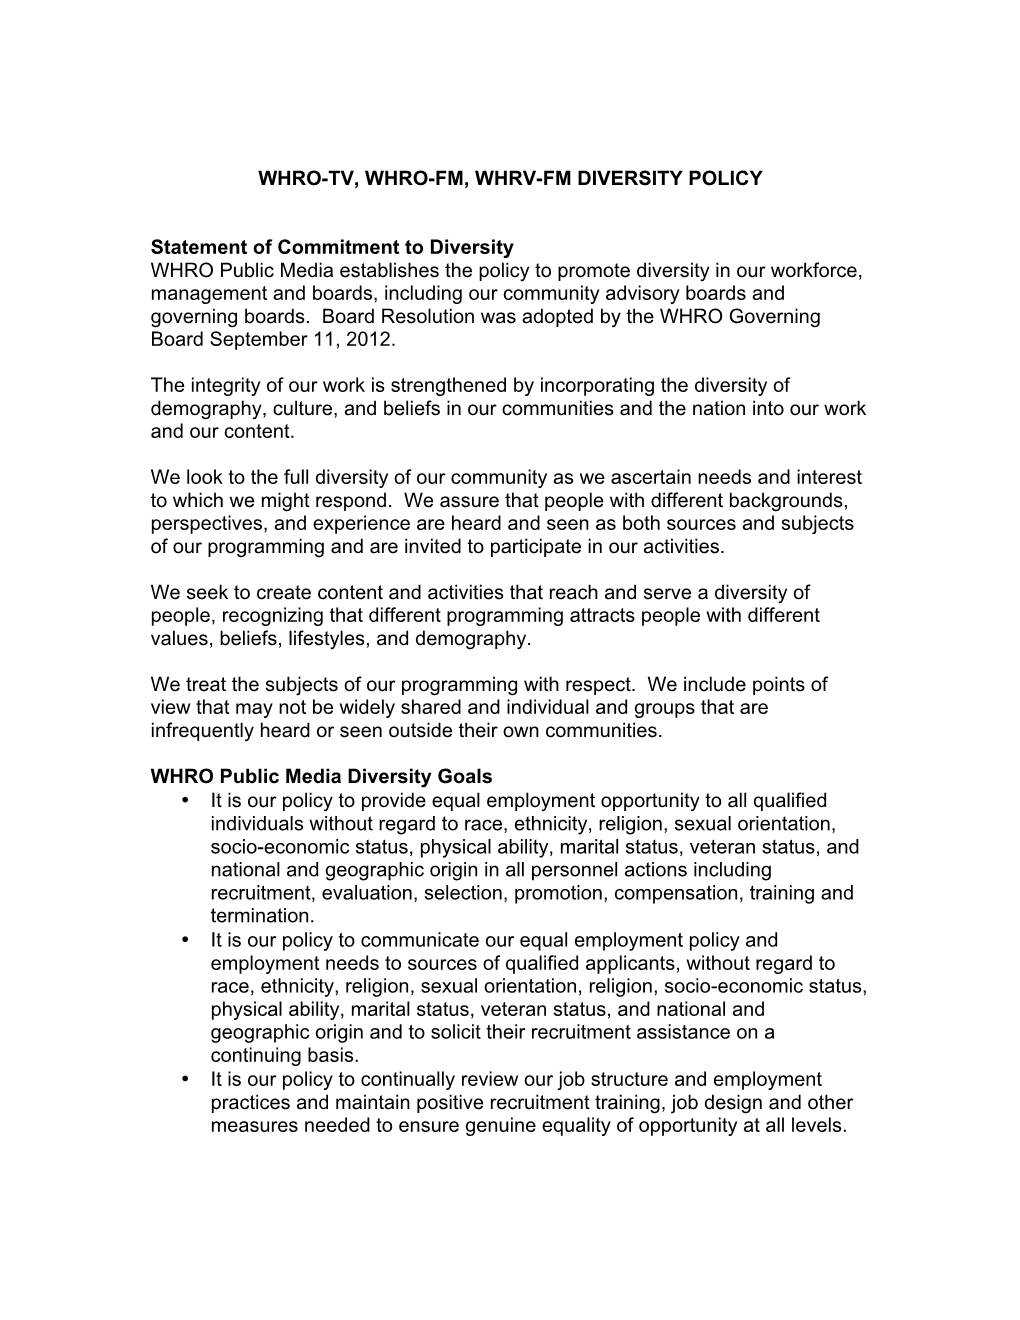 WHRO-TV, WHRO-FM, WHRV Diversity Policy 2014